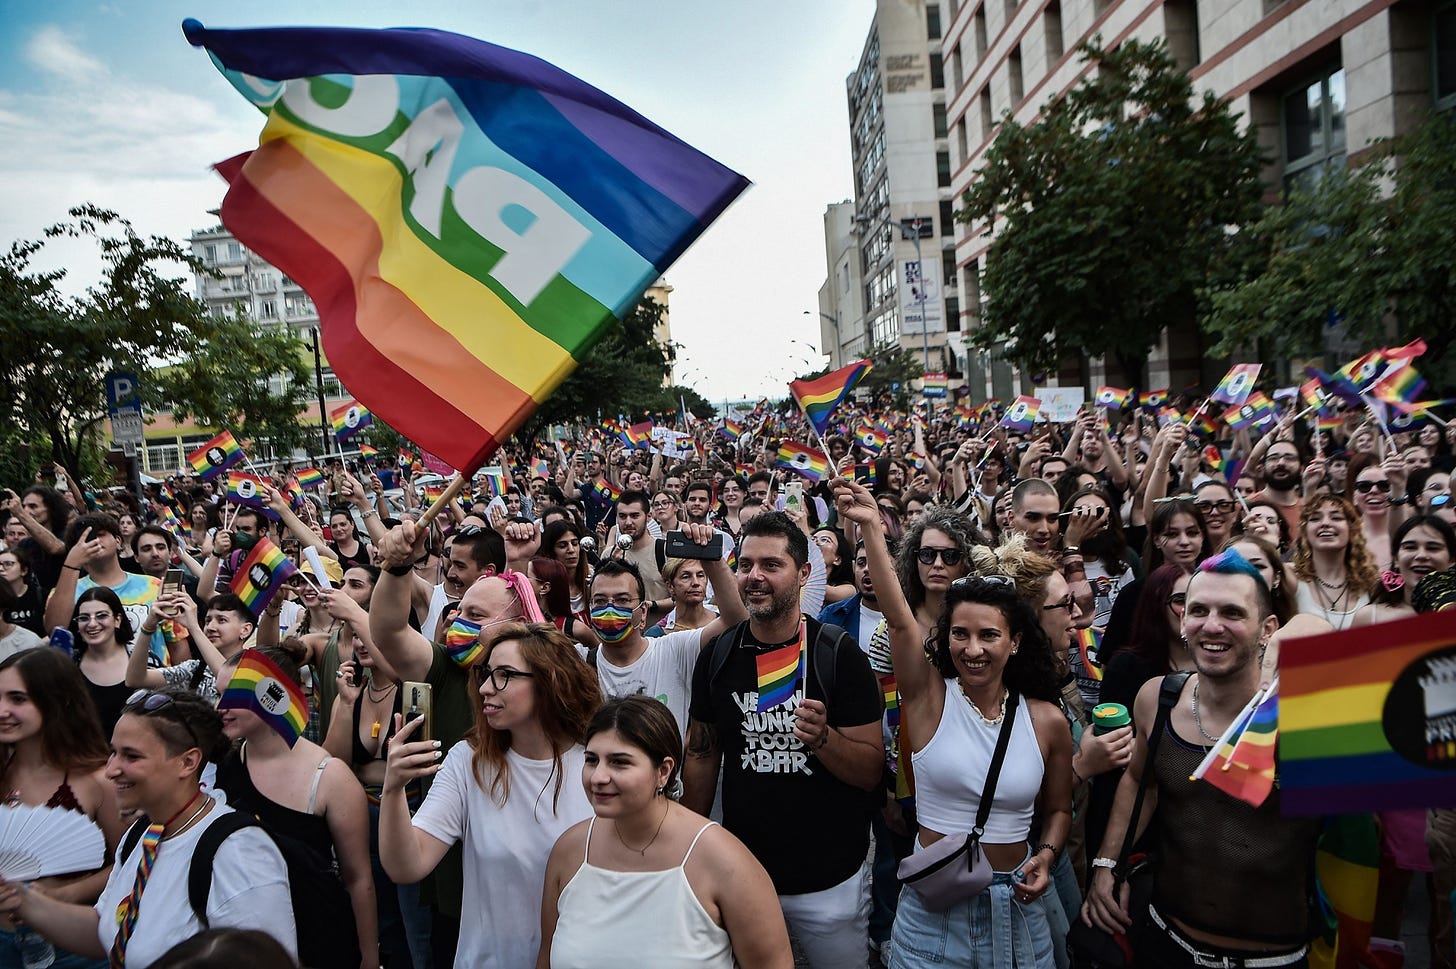 Most LGBTQ Friendly Country? Greece Is Making Steady Progress - Bloomberg